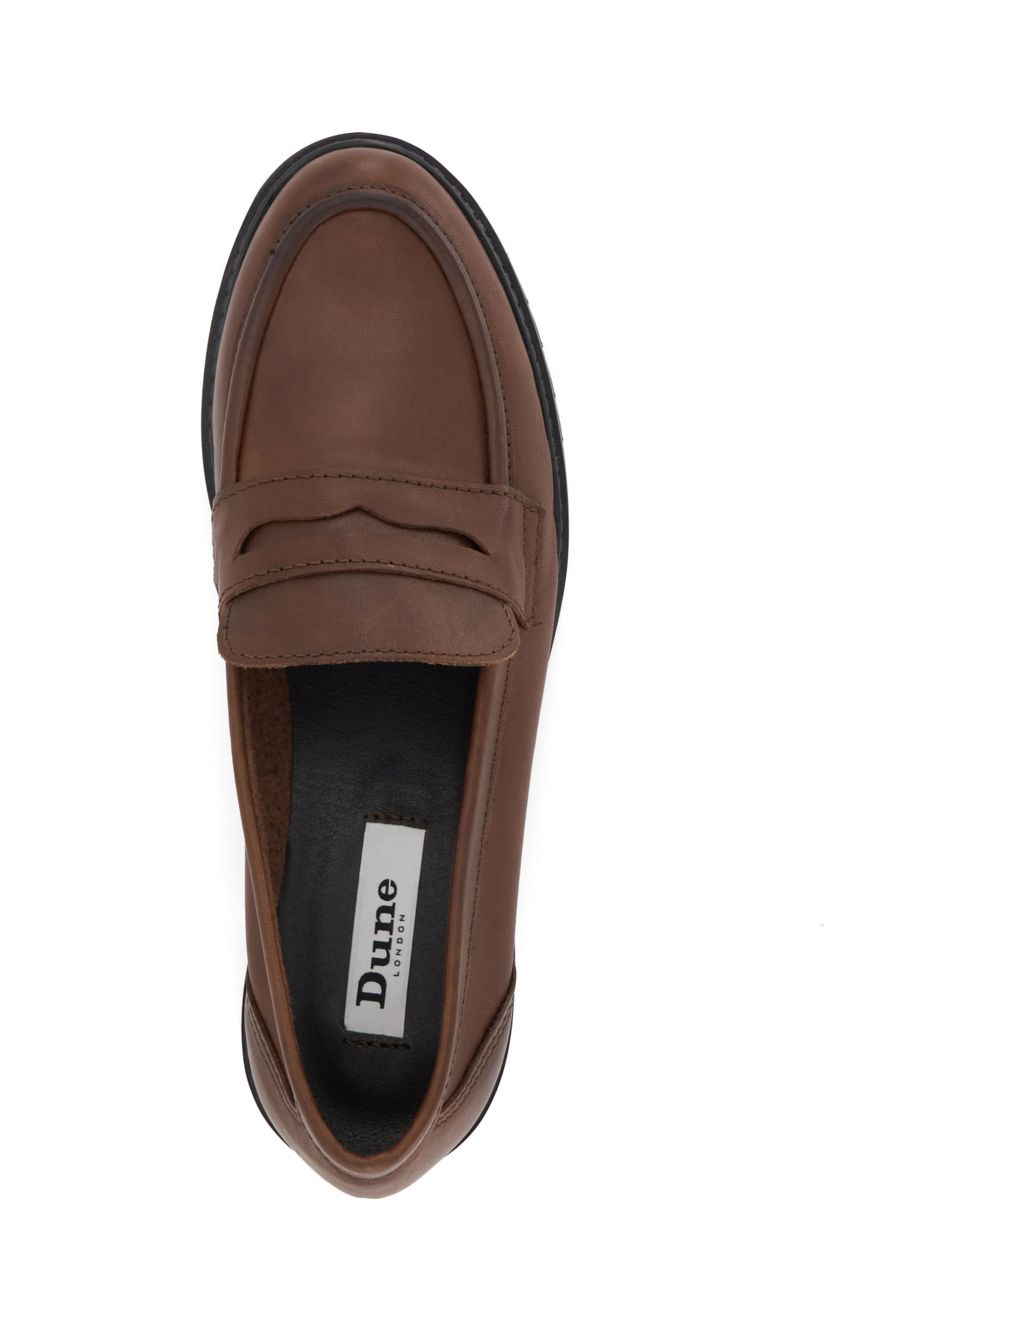 Leather Slip On Loafers image 4